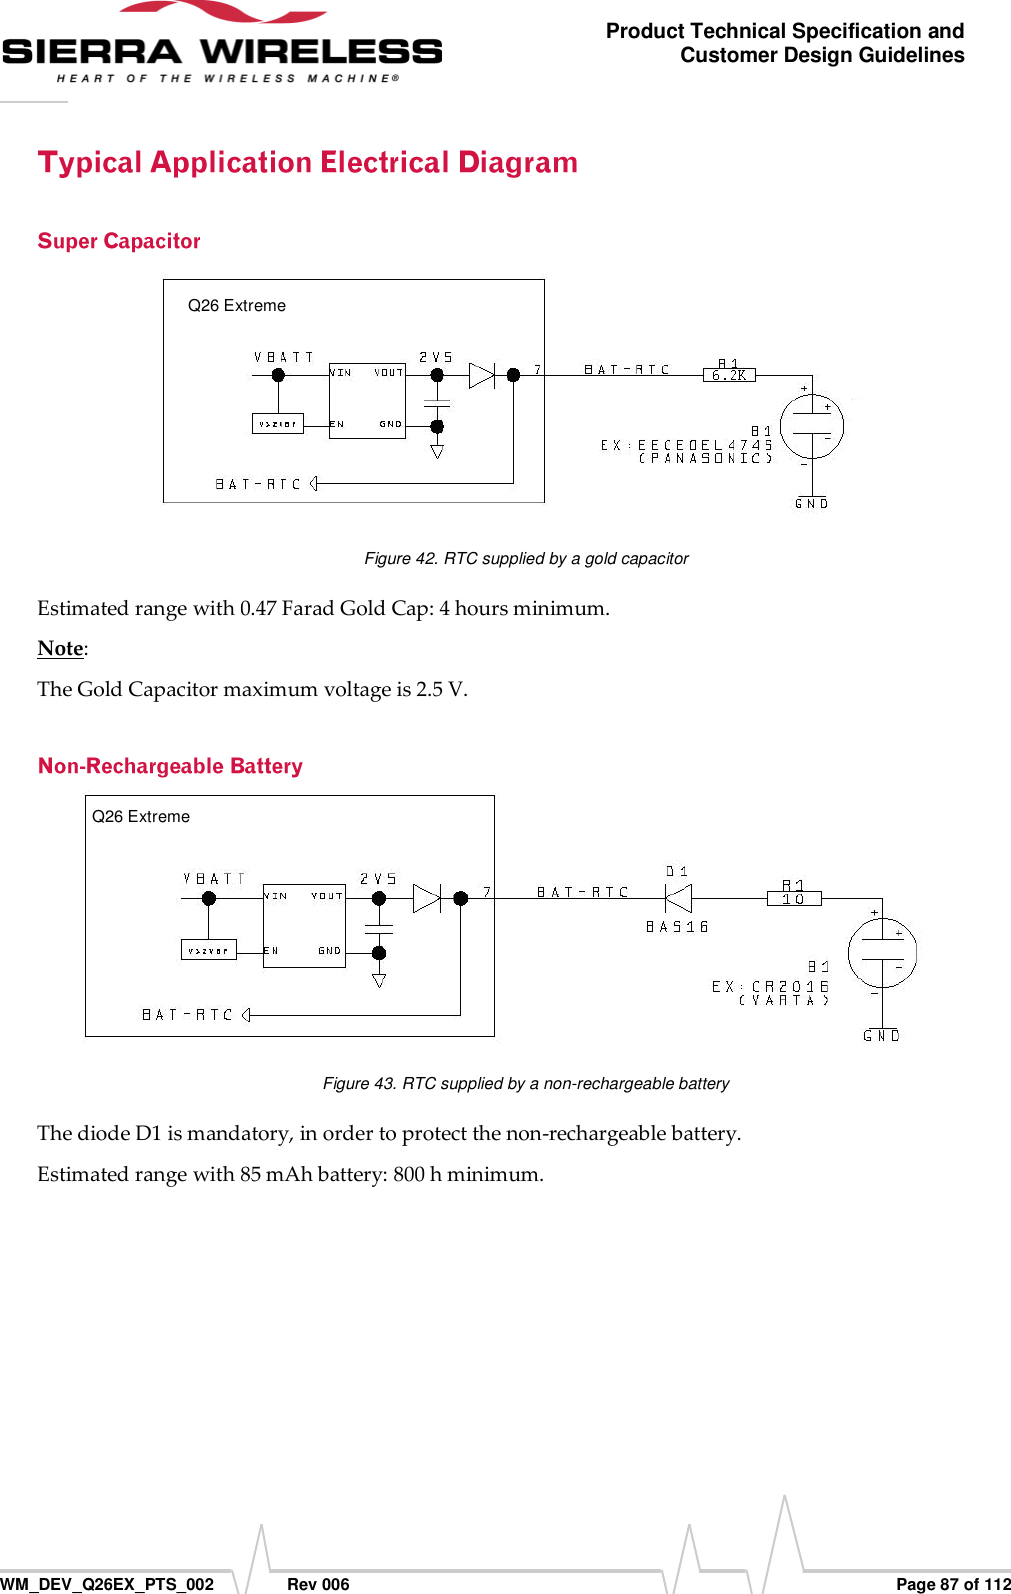      WM_DEV_Q26EX_PTS_002  Rev 006  Page 87 of 112 Product Technical Specification and Customer Design Guidelines  Figure 42. RTC supplied by a gold capacitor Estimated range with 0.47 Farad Gold Cap: 4 hours minimum. Note:  The Gold Capacitor maximum voltage is 2.5 V.  Figure 43. RTC supplied by a non-rechargeable battery The diode D1 is mandatory, in order to protect the non-rechargeable battery. Estimated range with 85 mAh battery: 800 h minimum. Q26 Extreme Q26 Extreme 